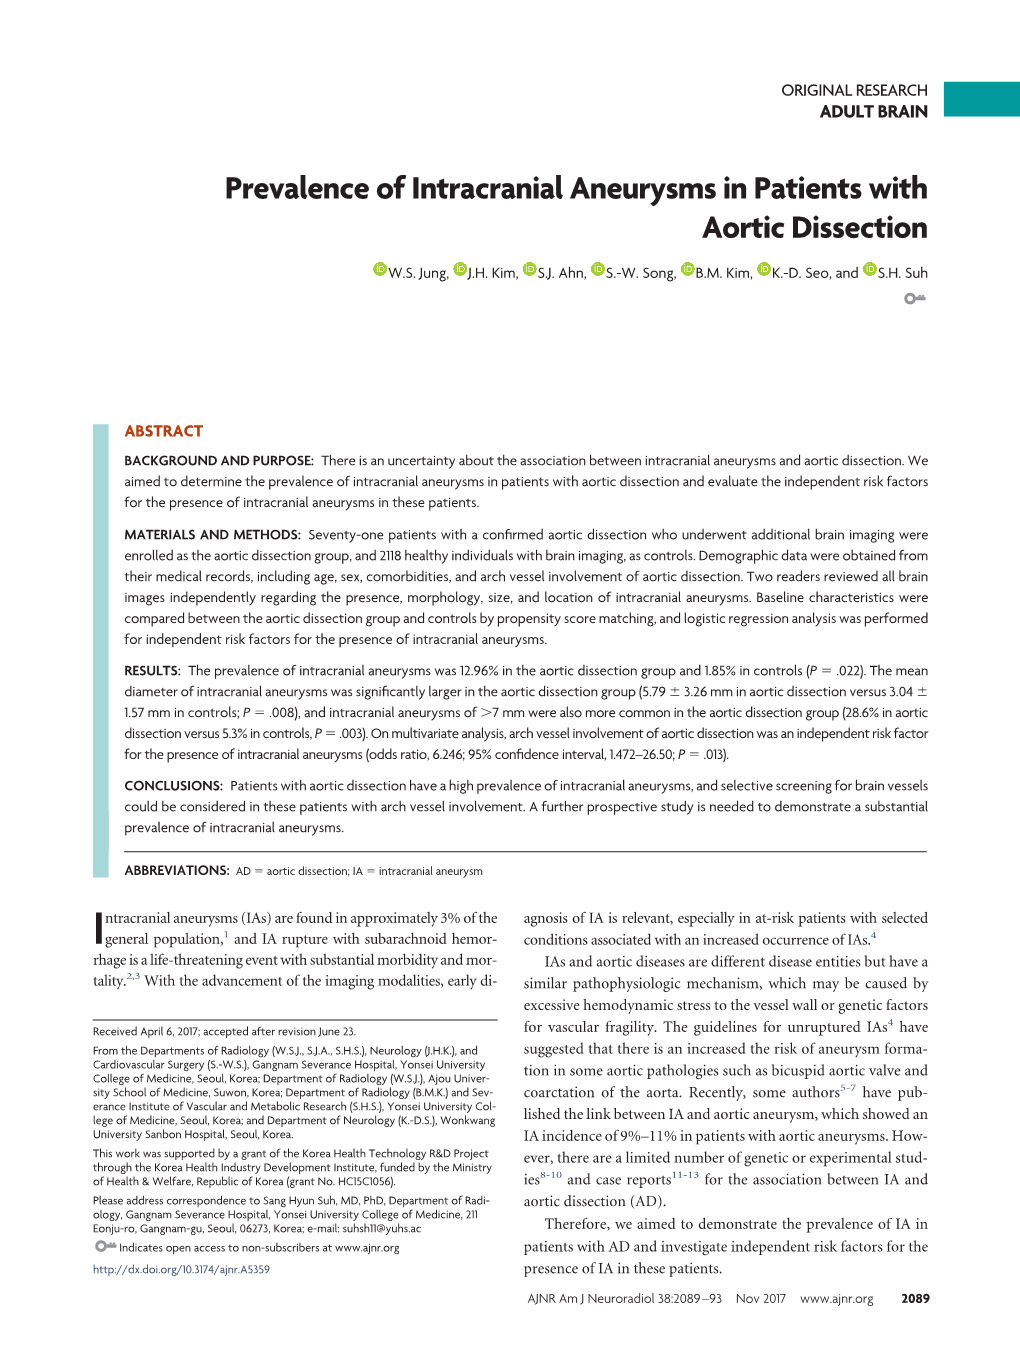 Prevalence of Intracranial Aneurysms in Patients with Aortic Dissection